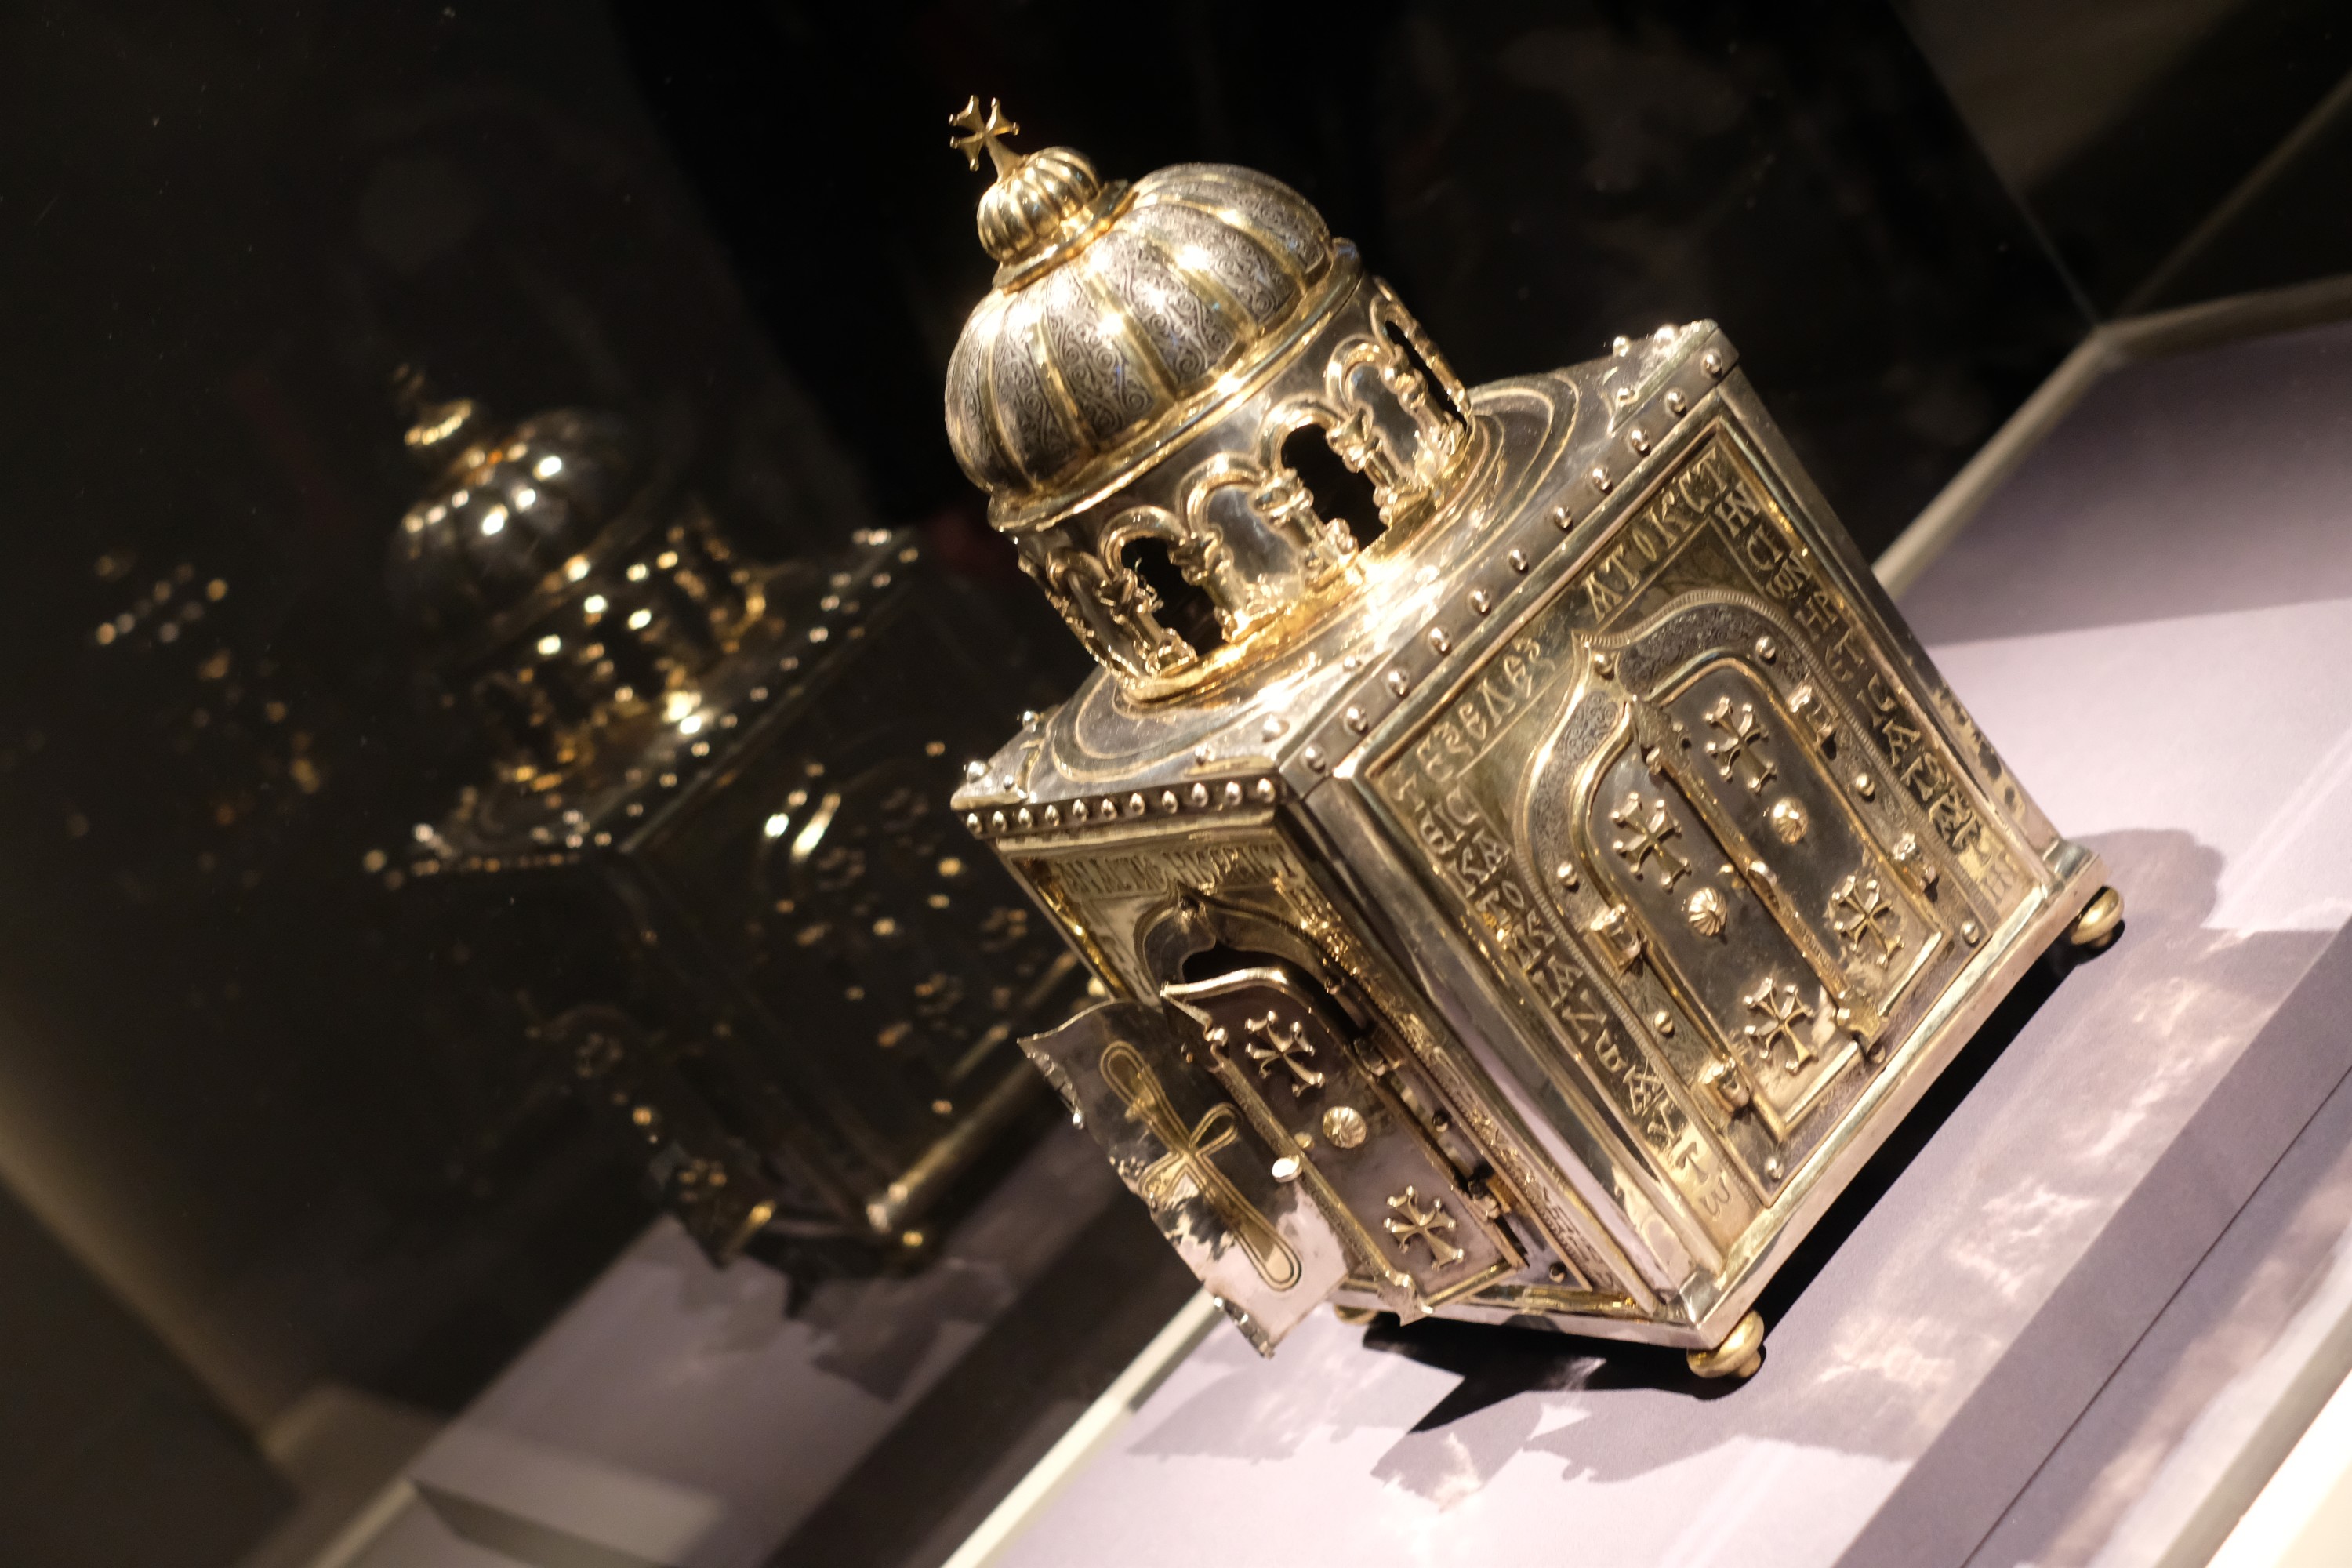 reliquary, to hold a saint's skull